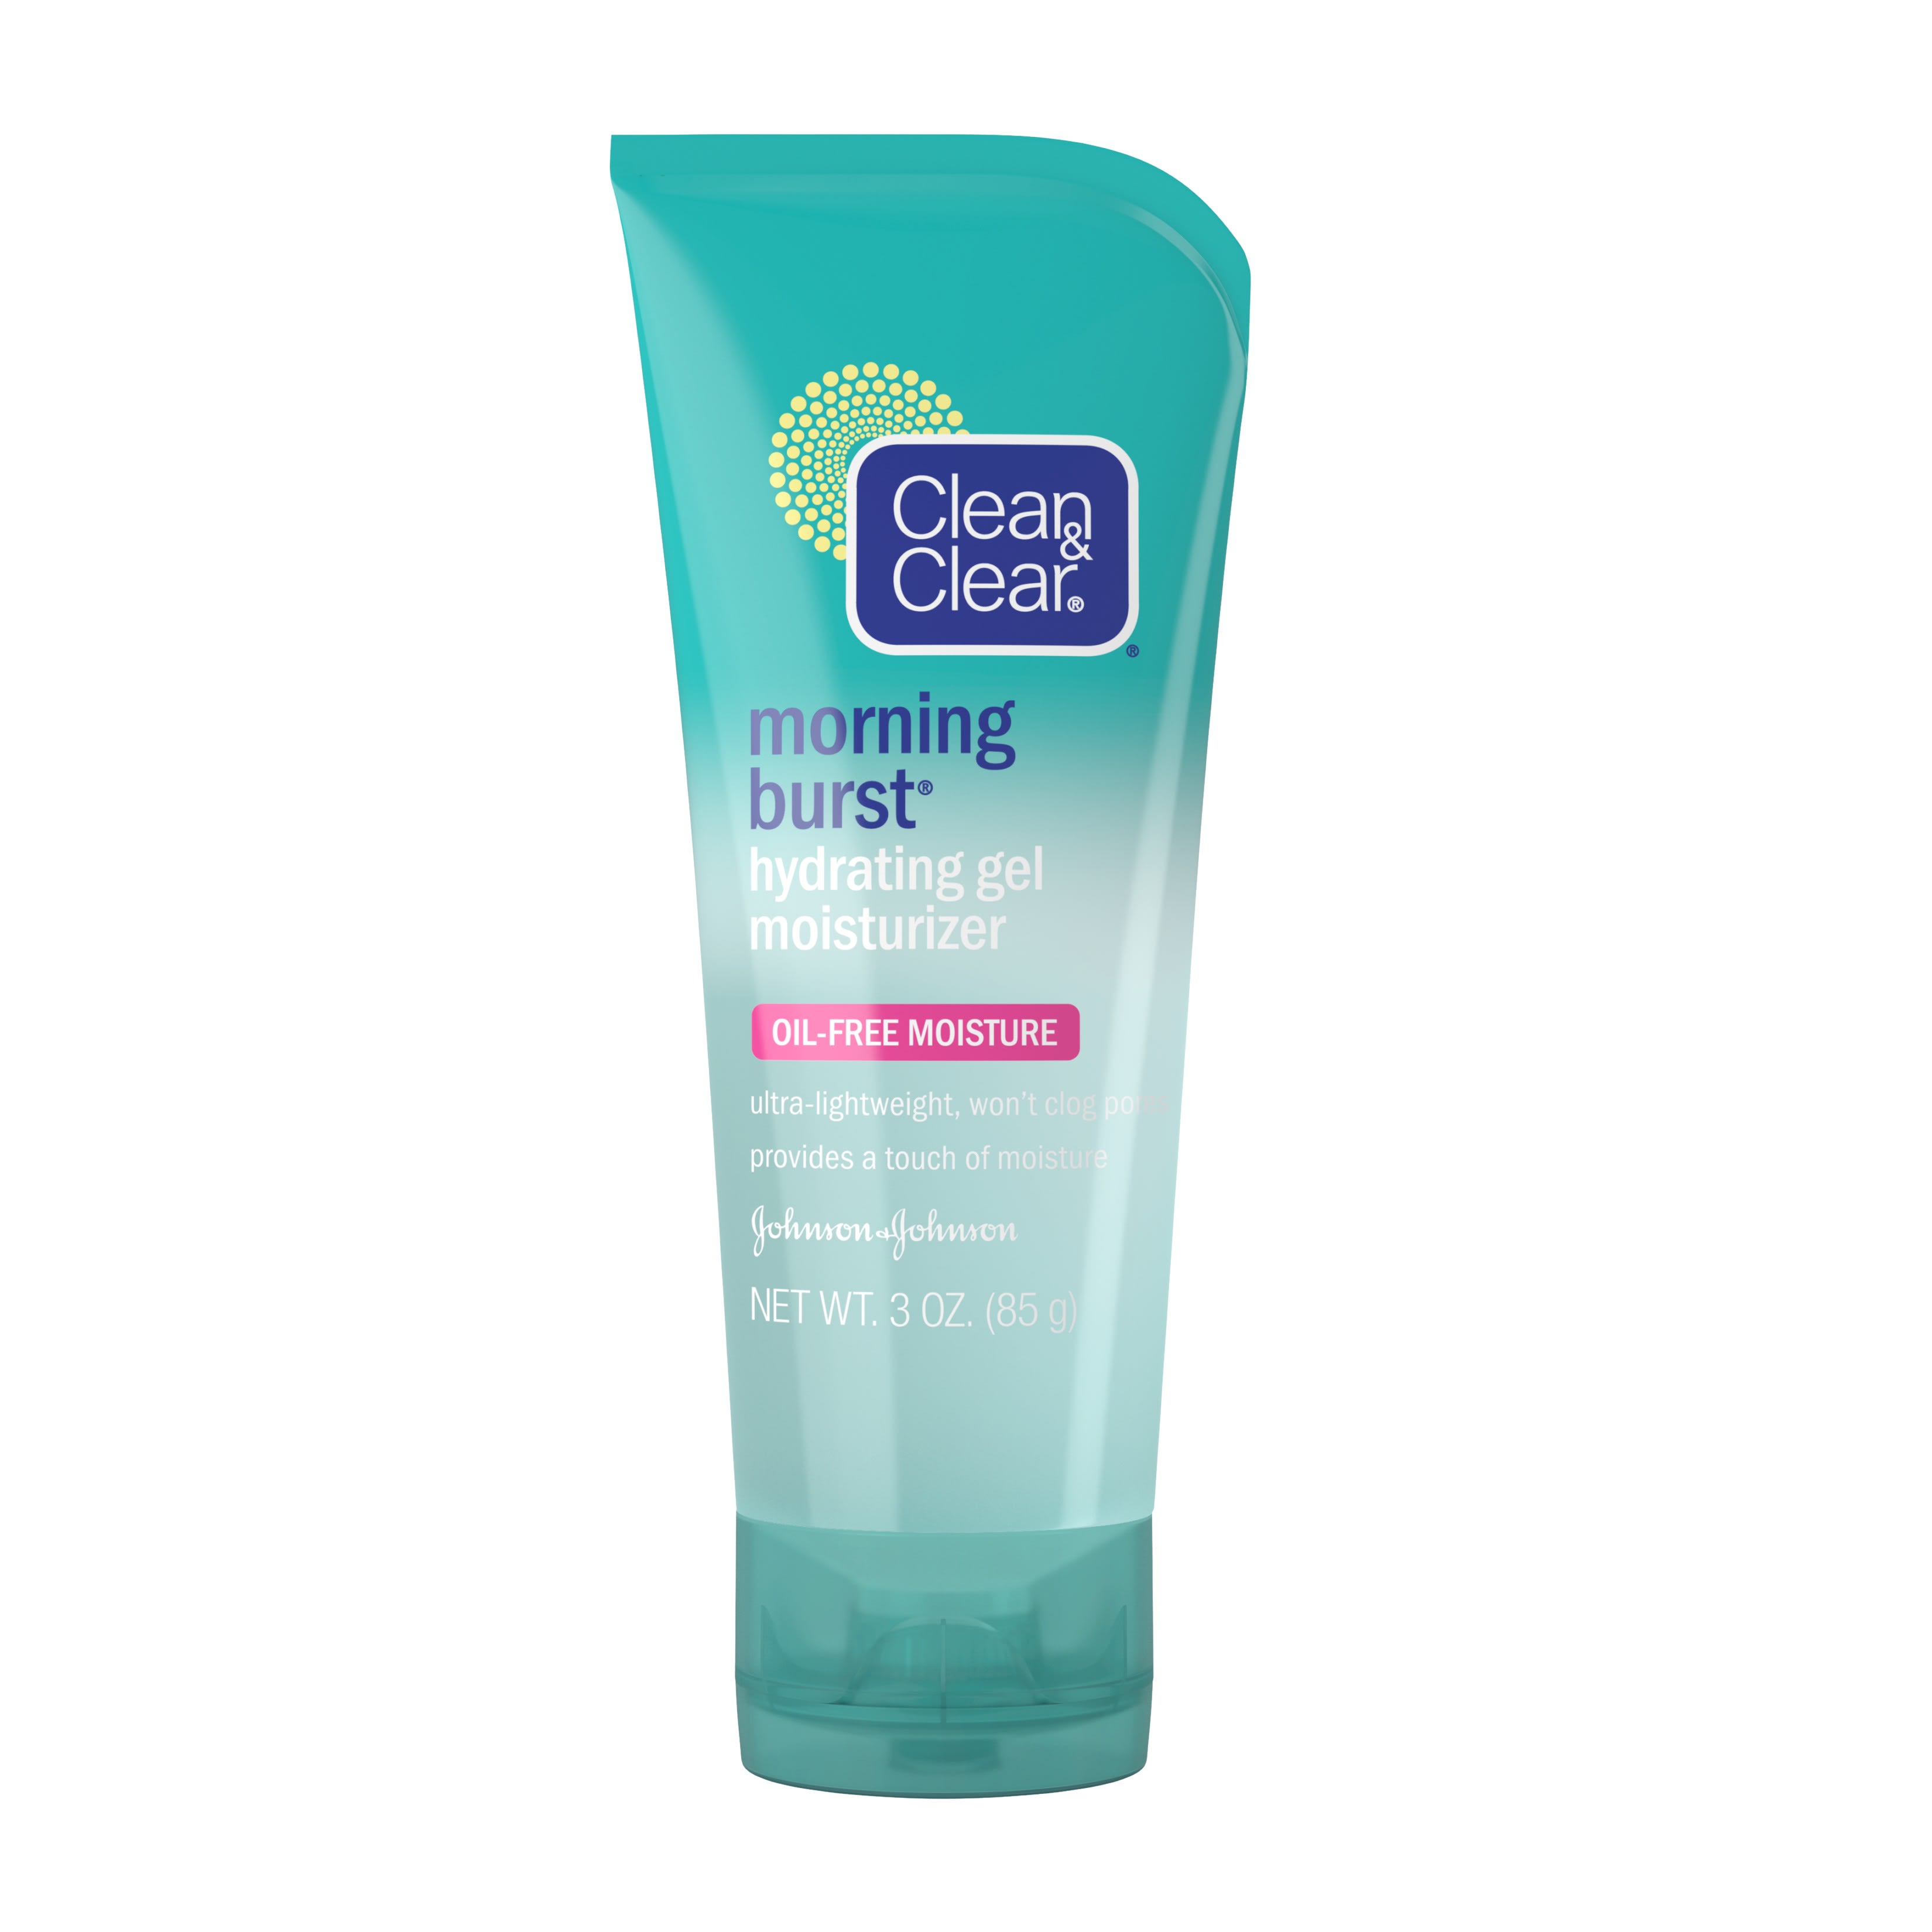 Clean & Clear Morning Burst Hydrating Gel Face Moisturizer, 3 oz - image 1 of 9